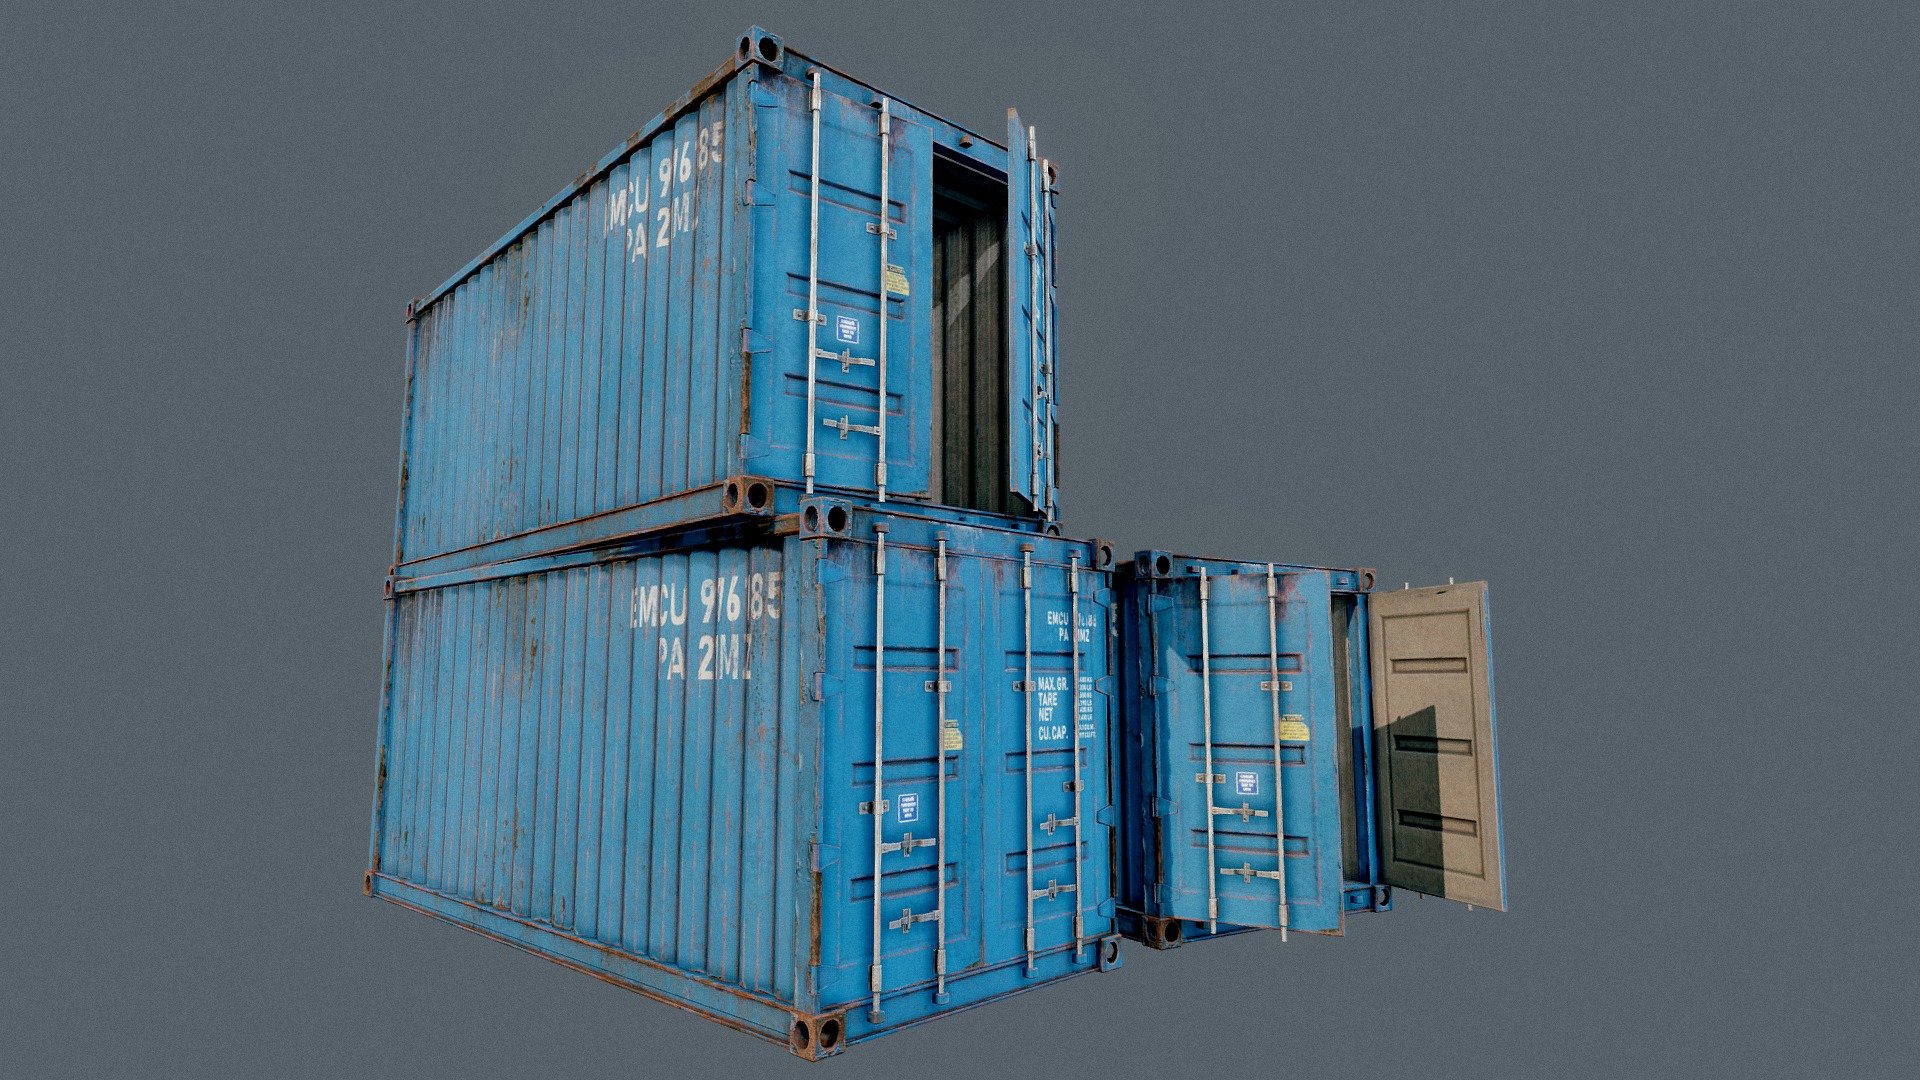 Enterable Shipping Container 03 - PBR

Very Detailed Low Poly Shipping Container with Interior, with High-Quality PBR Textures.

Because several Requests, i have made this new container which have interior.

Stickers and texts are custom made in photoshop.

Doors can be opened

Fits perfect for any PBR game as Environment Decoration etc.

Created with 3DSMAX, Zbrush and Substance Painter.

Standard Textures
Base Color, Metallic, Roughness, Height, AO, Normal, Maps

Unreal 4 Textures
Base Color, Normal, OcclusionRoughnessMetallic

Unity 5/2017 Textures
Albedo, SpecularSmoothness, Normal, and AO Maps

2x4096x4096 TGA Textures

Please Note, this PBR Textures Only. 

Low Poly Triangles 

7454 Tris
4530 Verts

File Formats :

.Max2019
.Max2018
.Max2017
.Max2016
.FBX
.OBJ
.3DS
.DAE - Enterable Shipping Container 03 - PBR - Buy Royalty Free 3D model by GamePoly (@triix3d) 3d model